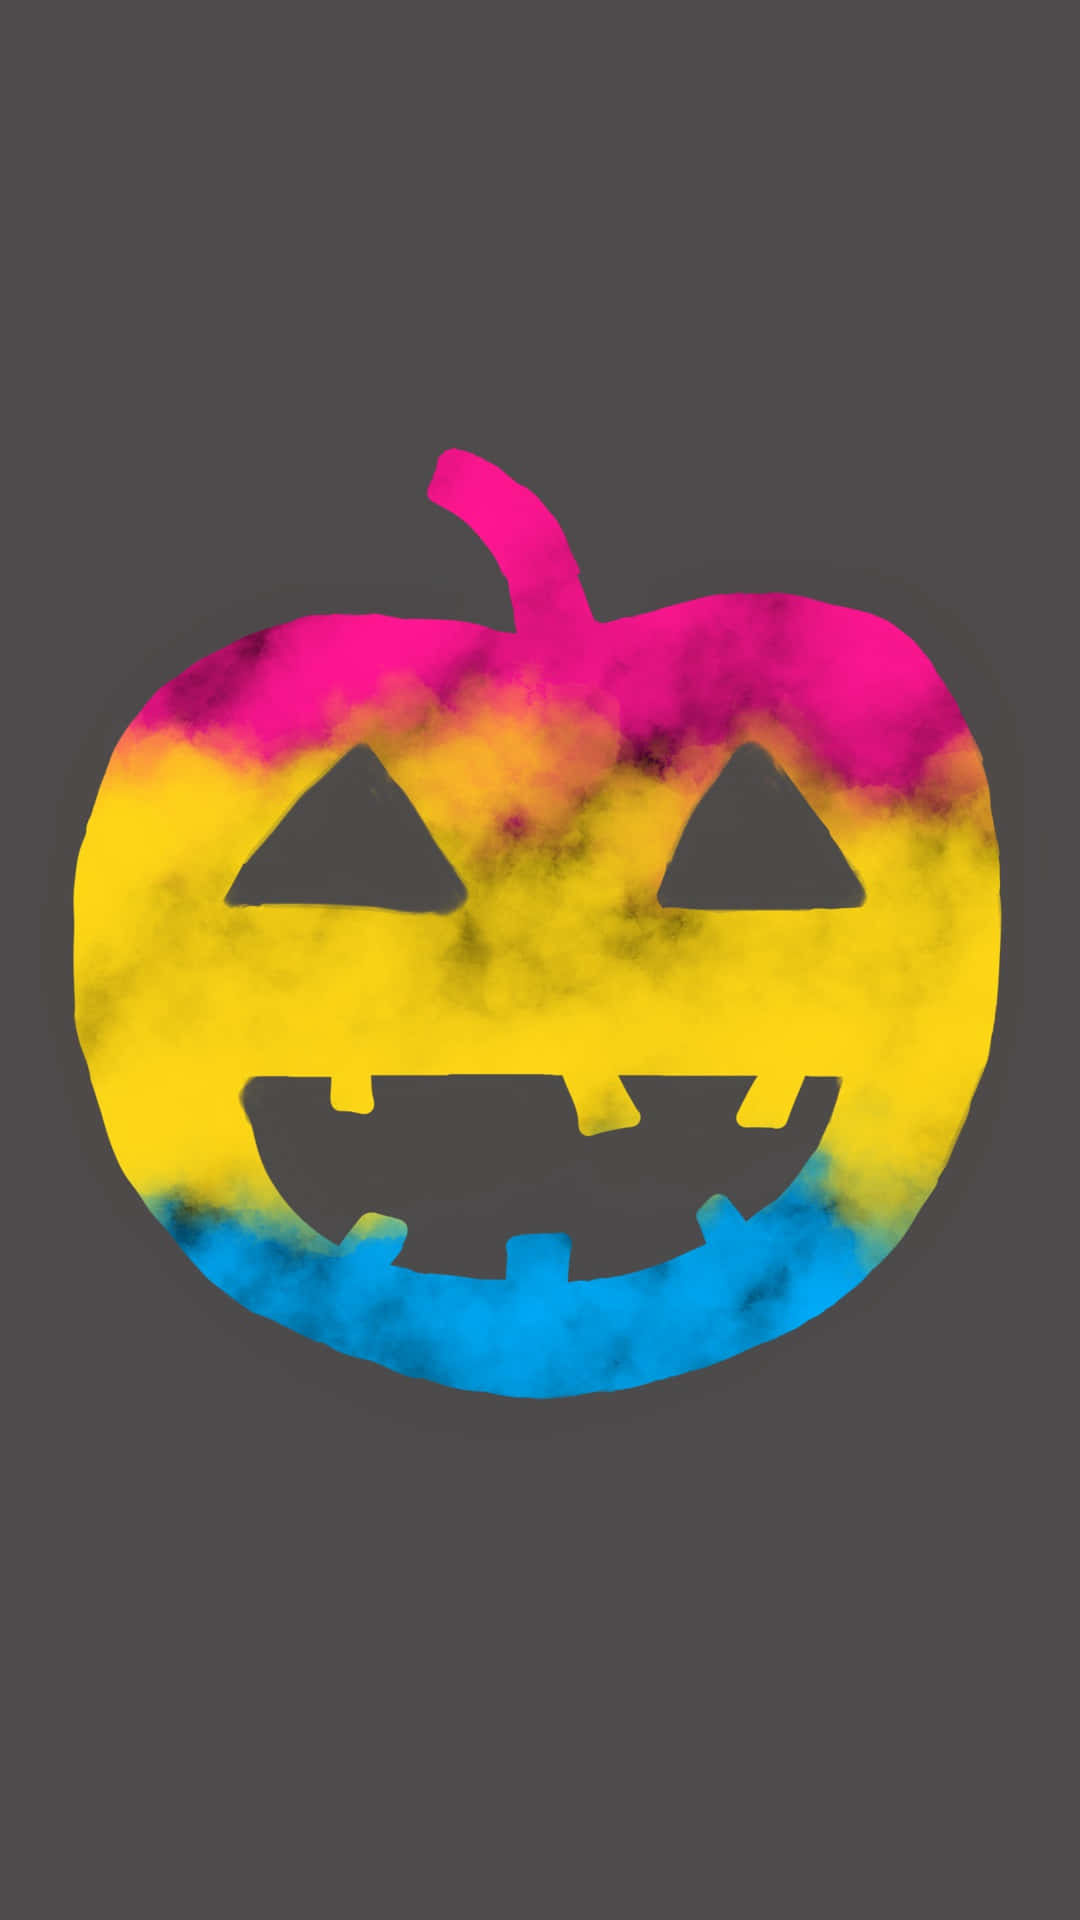 A Colorful Pumpkin With A Rainbow Colored Smoke